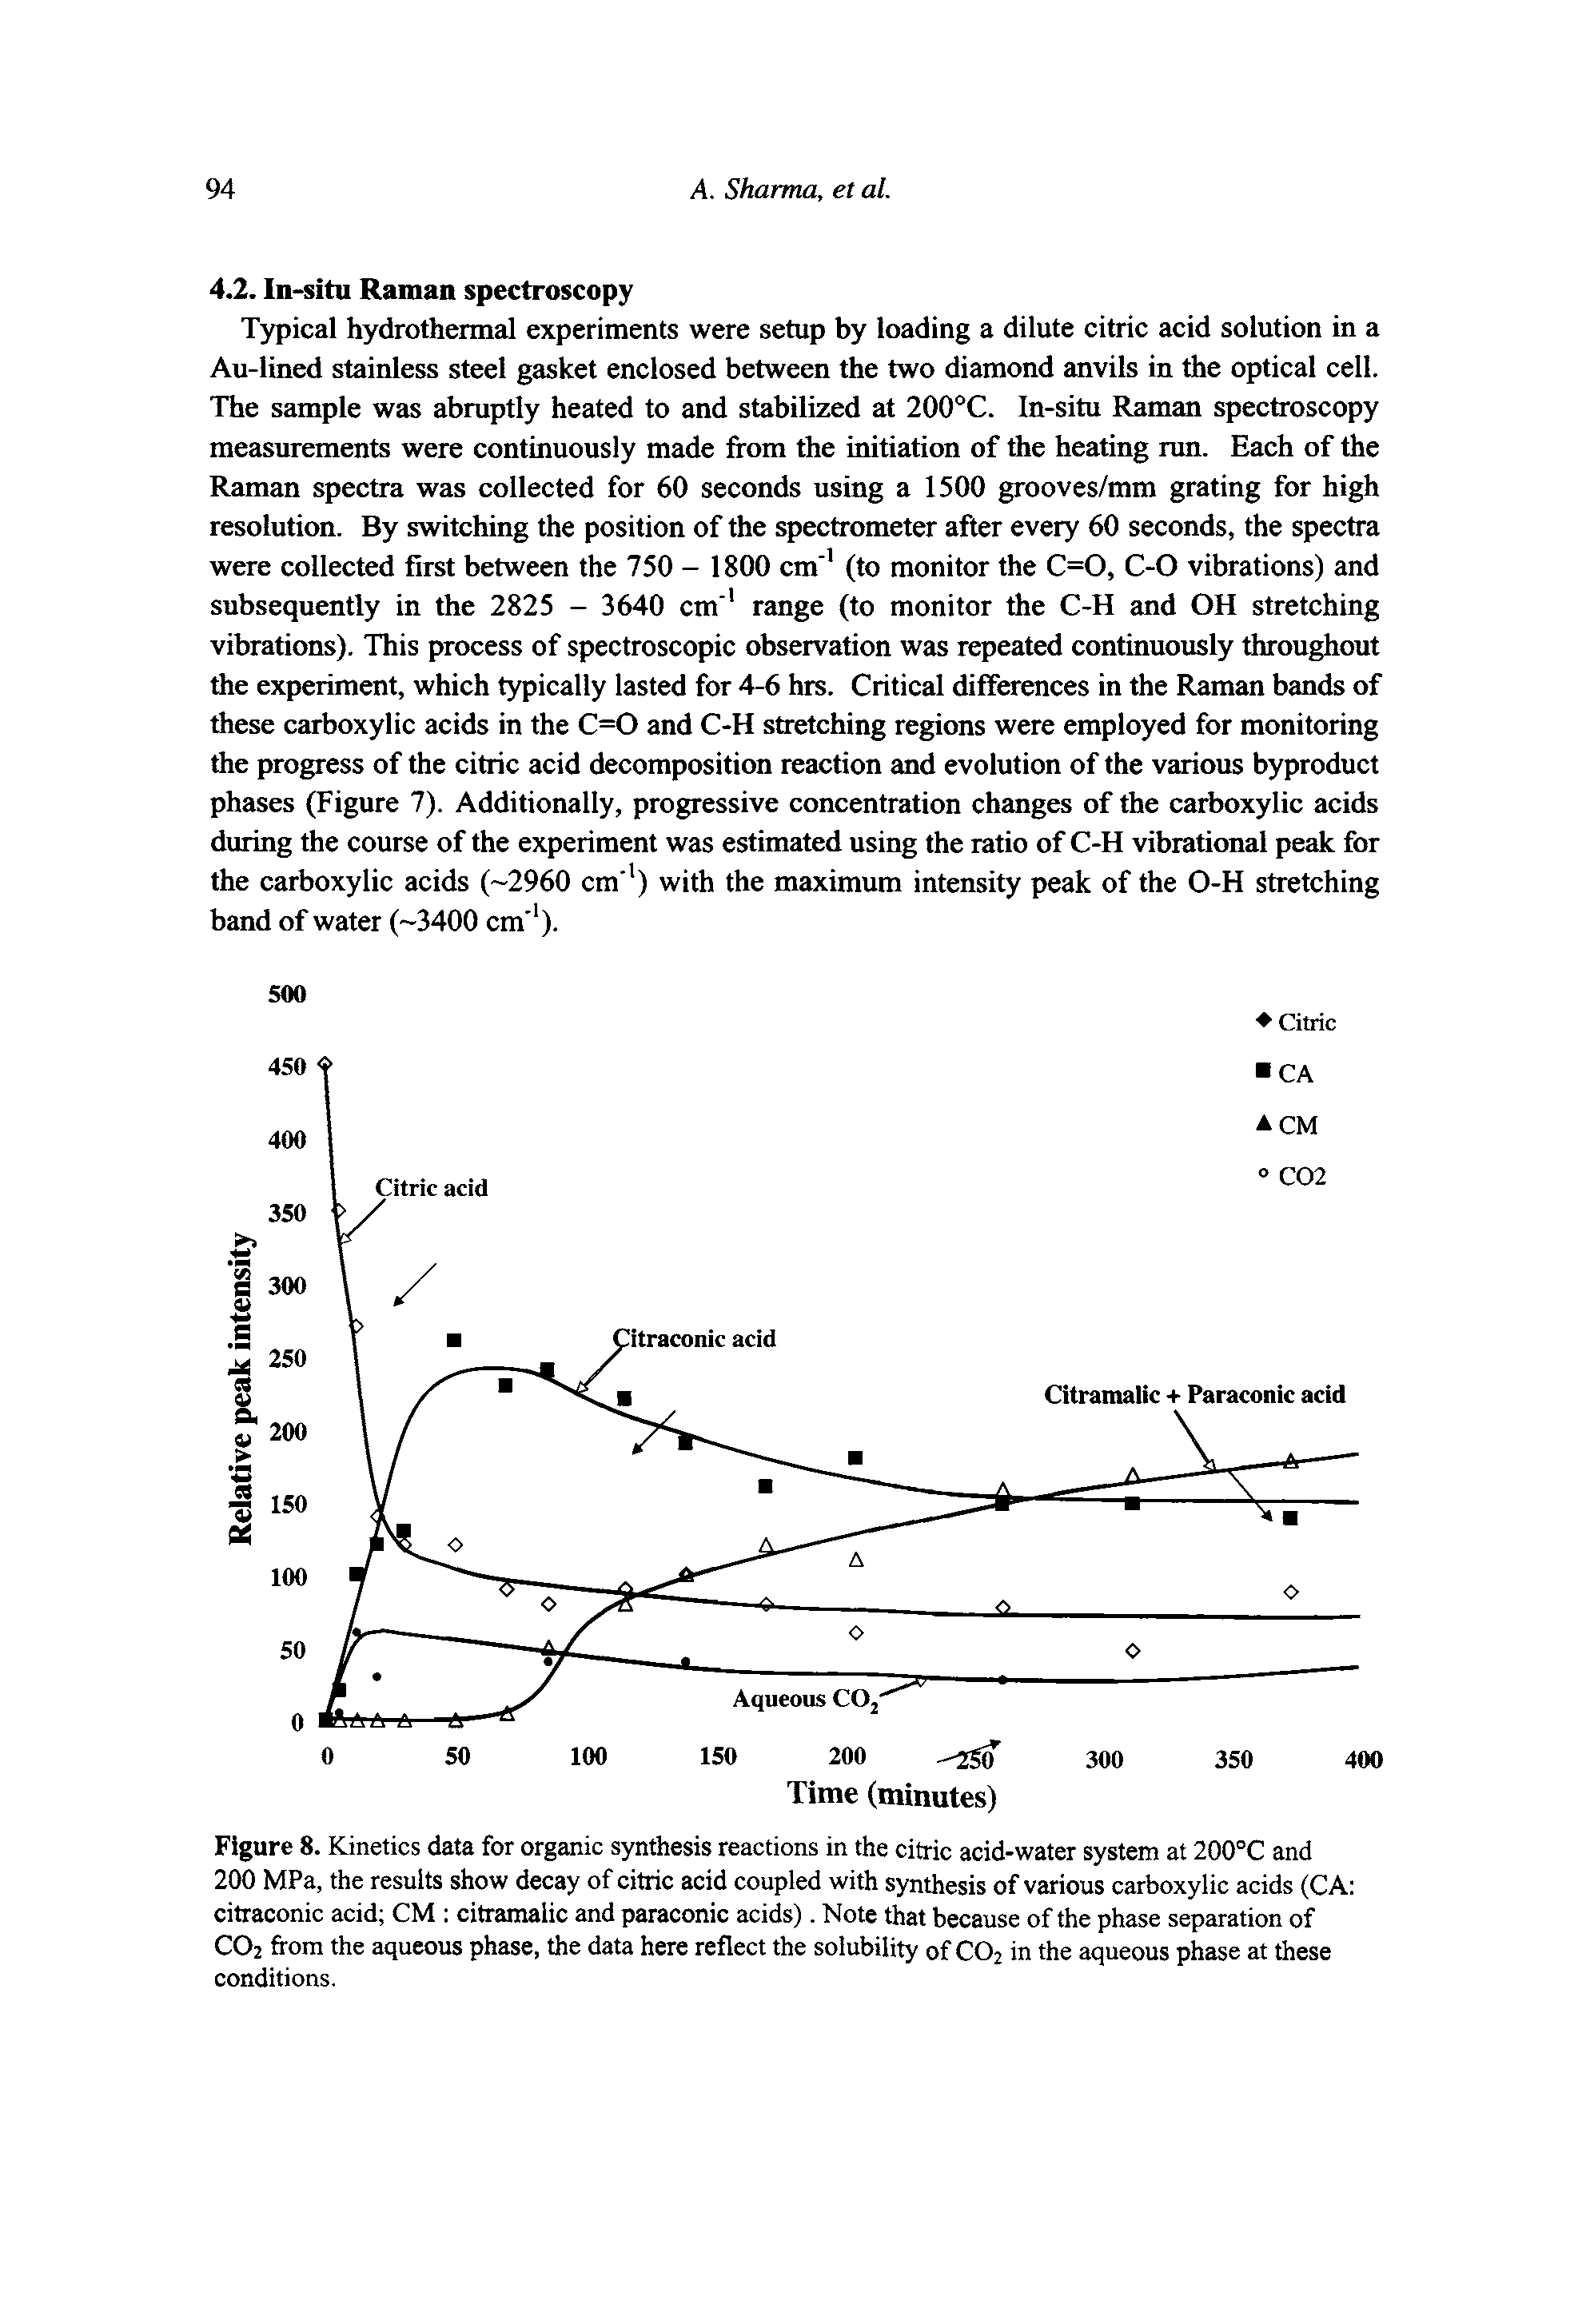 Figure 8. Kinetics data for organic synthesis reactions in the citric acid-water system at 200°C and 200 MPa, the results show decay of citric acid coupled with synthesis of various carboxylic acids (CA citraconic acid CM citramalic and paraconic acids). Note that because of the phase separation of CO2 from the aqueous phase, the data here reflect the solubility of CO2 in the aqueous phase at these conditions.